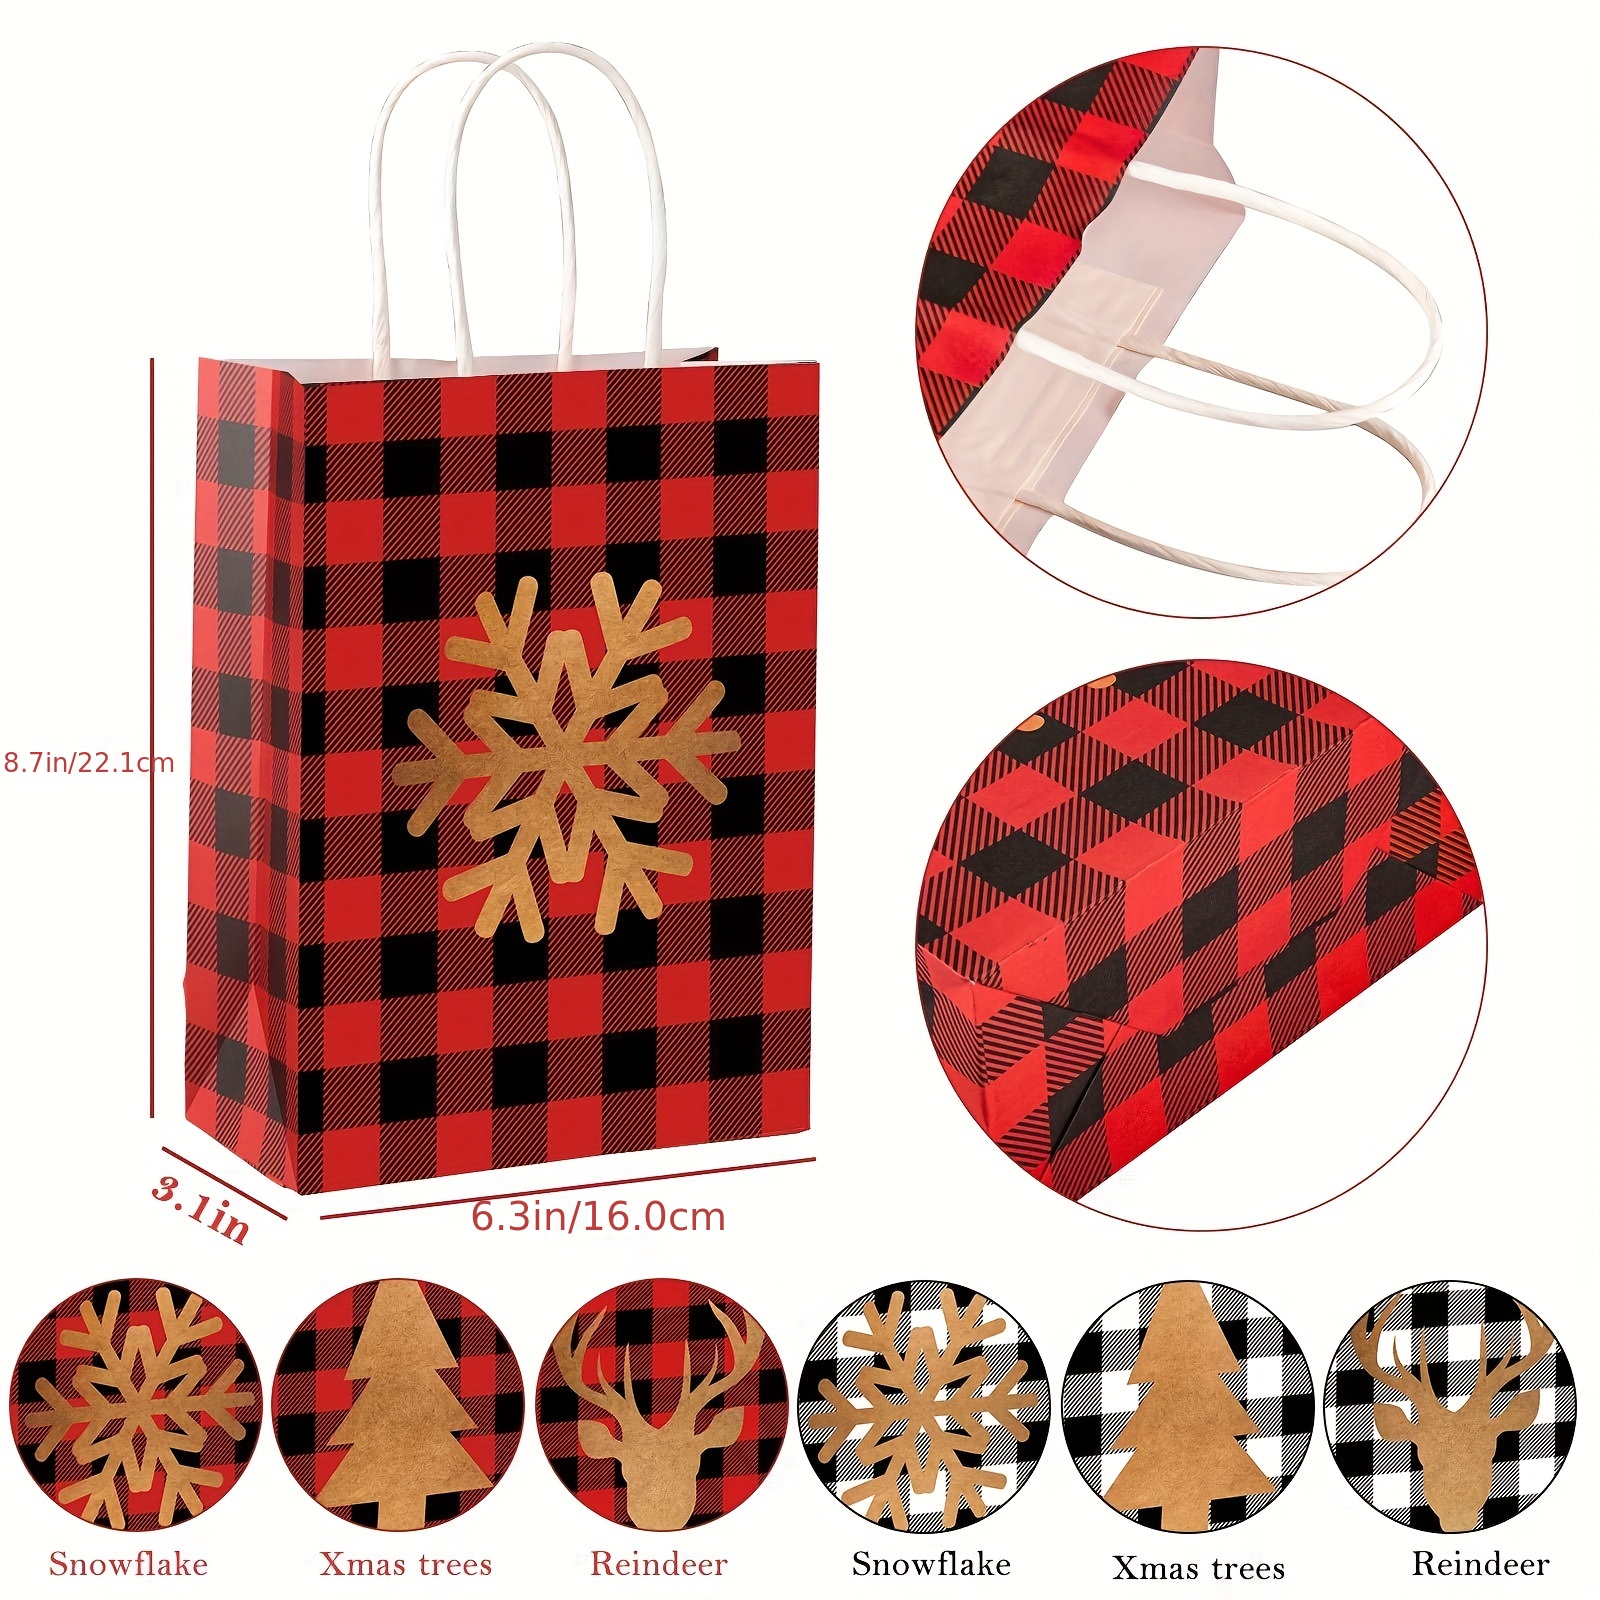 12pcs Small Christmas Gift Bags With Tissue Paper Christmas Gift Bags  Christmas Kraft Gift Bags For Holiday Paper Gift Bags，Party Favors